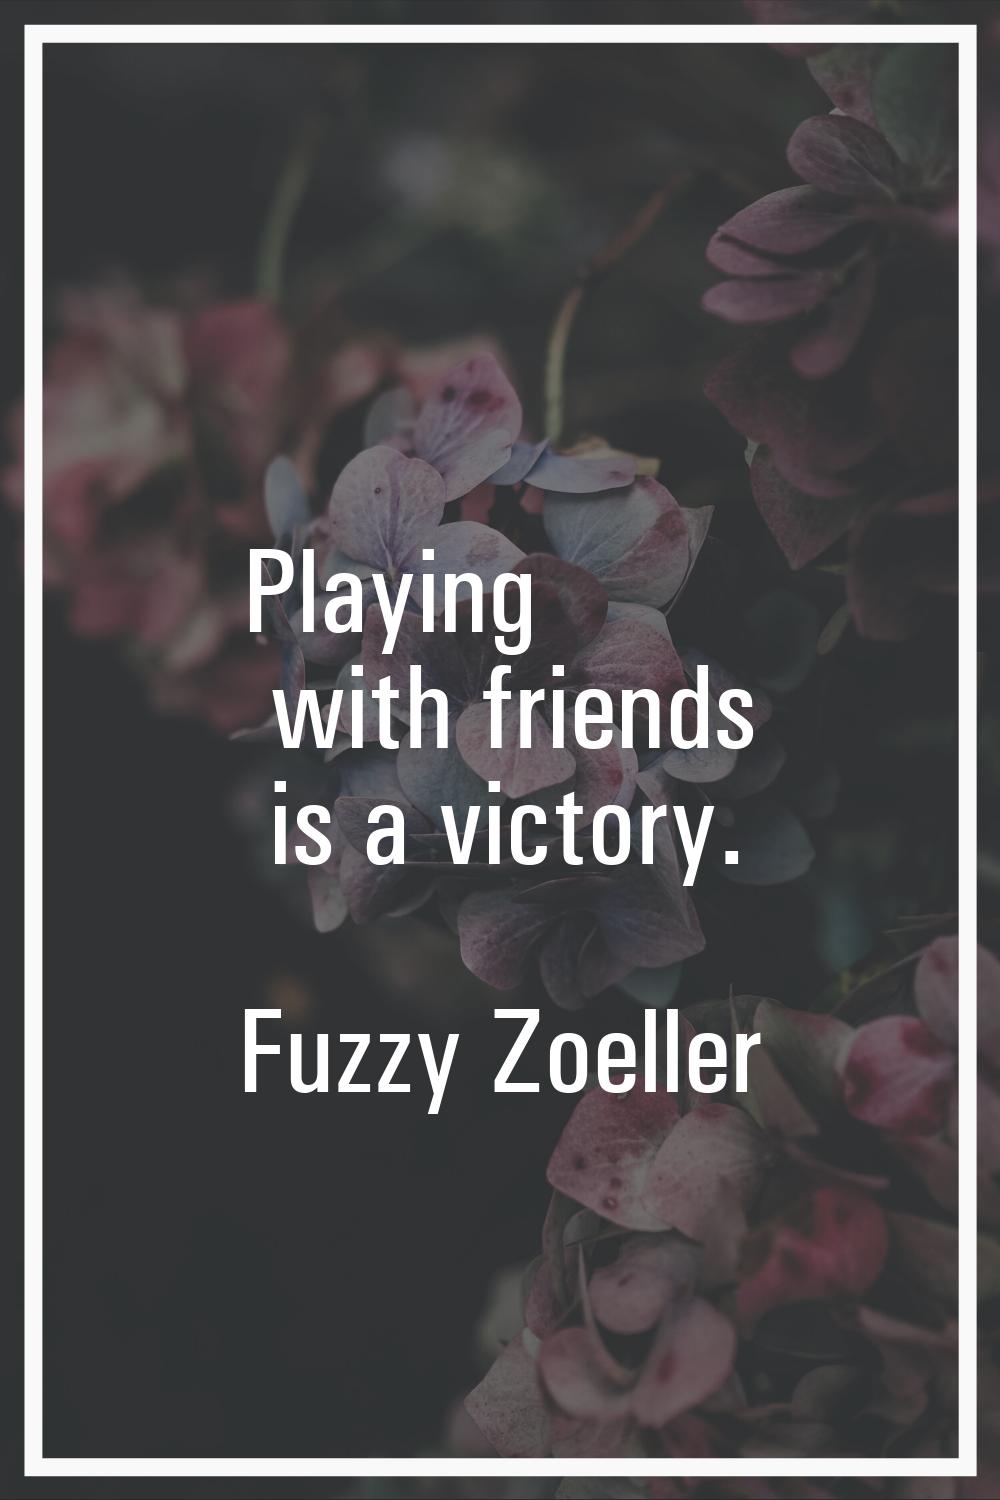 Playing with friends is a victory.